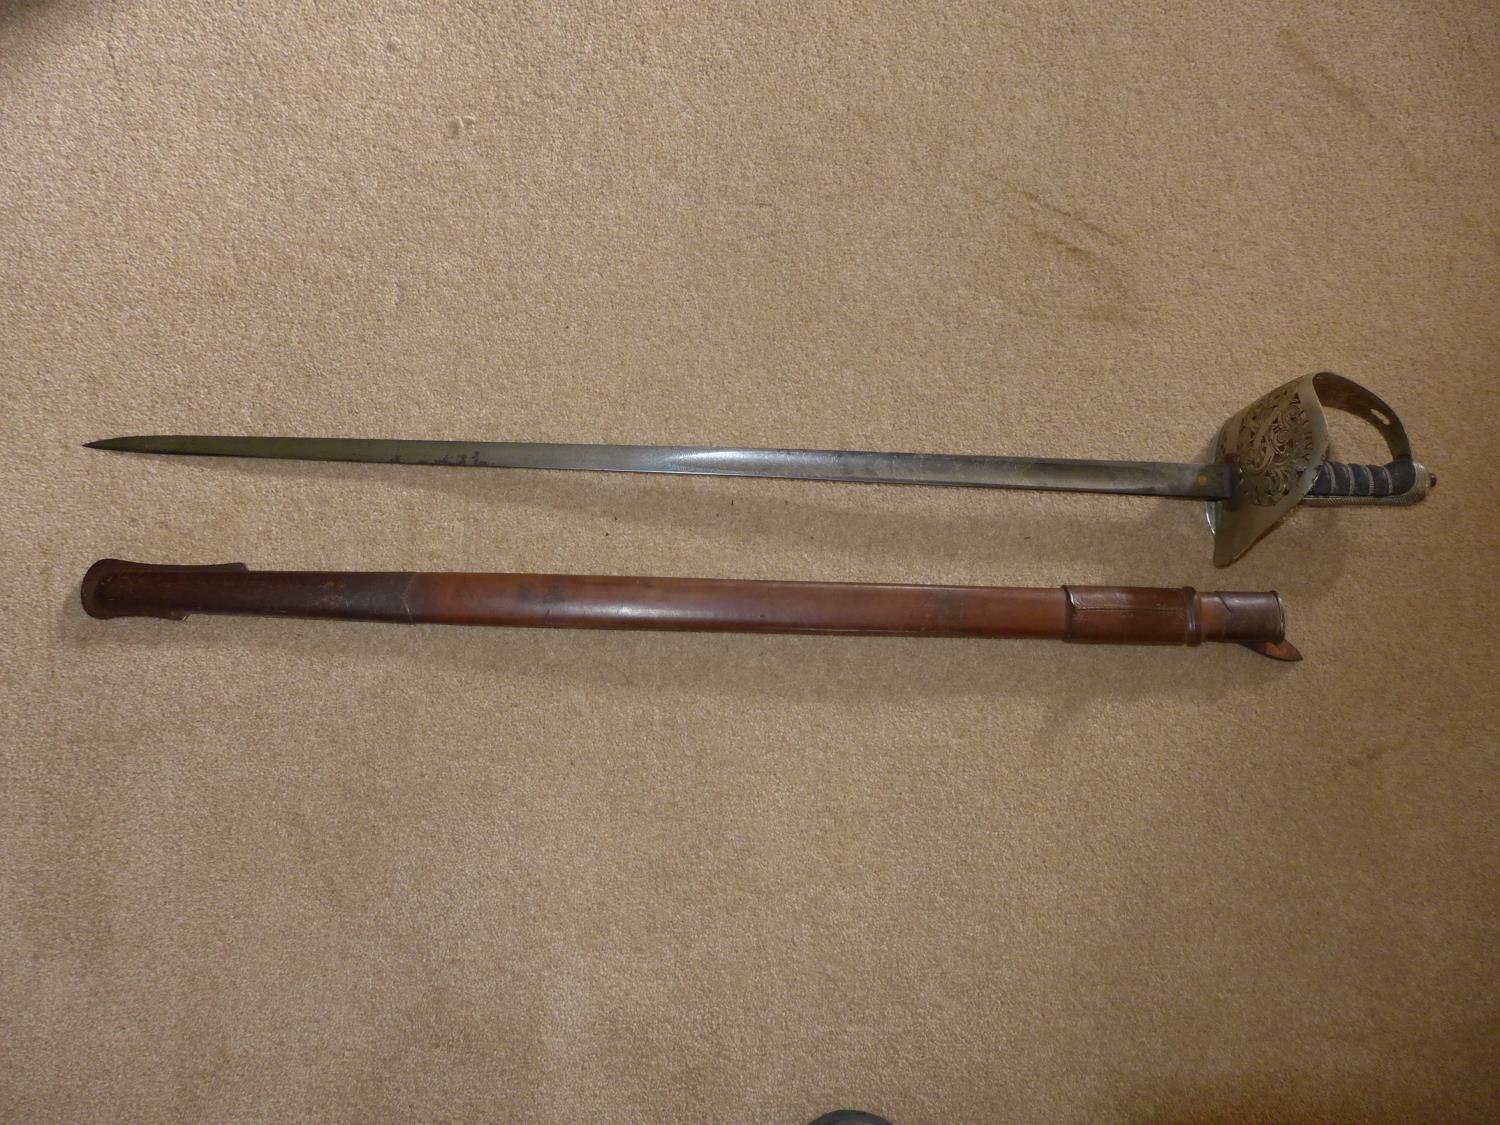 A GEORGE V 1895/1897 PATTERN INFANTRY OFFICERS SWORD, 83CM BLADE DATED 1916 WITH LEATHER SCABBARD